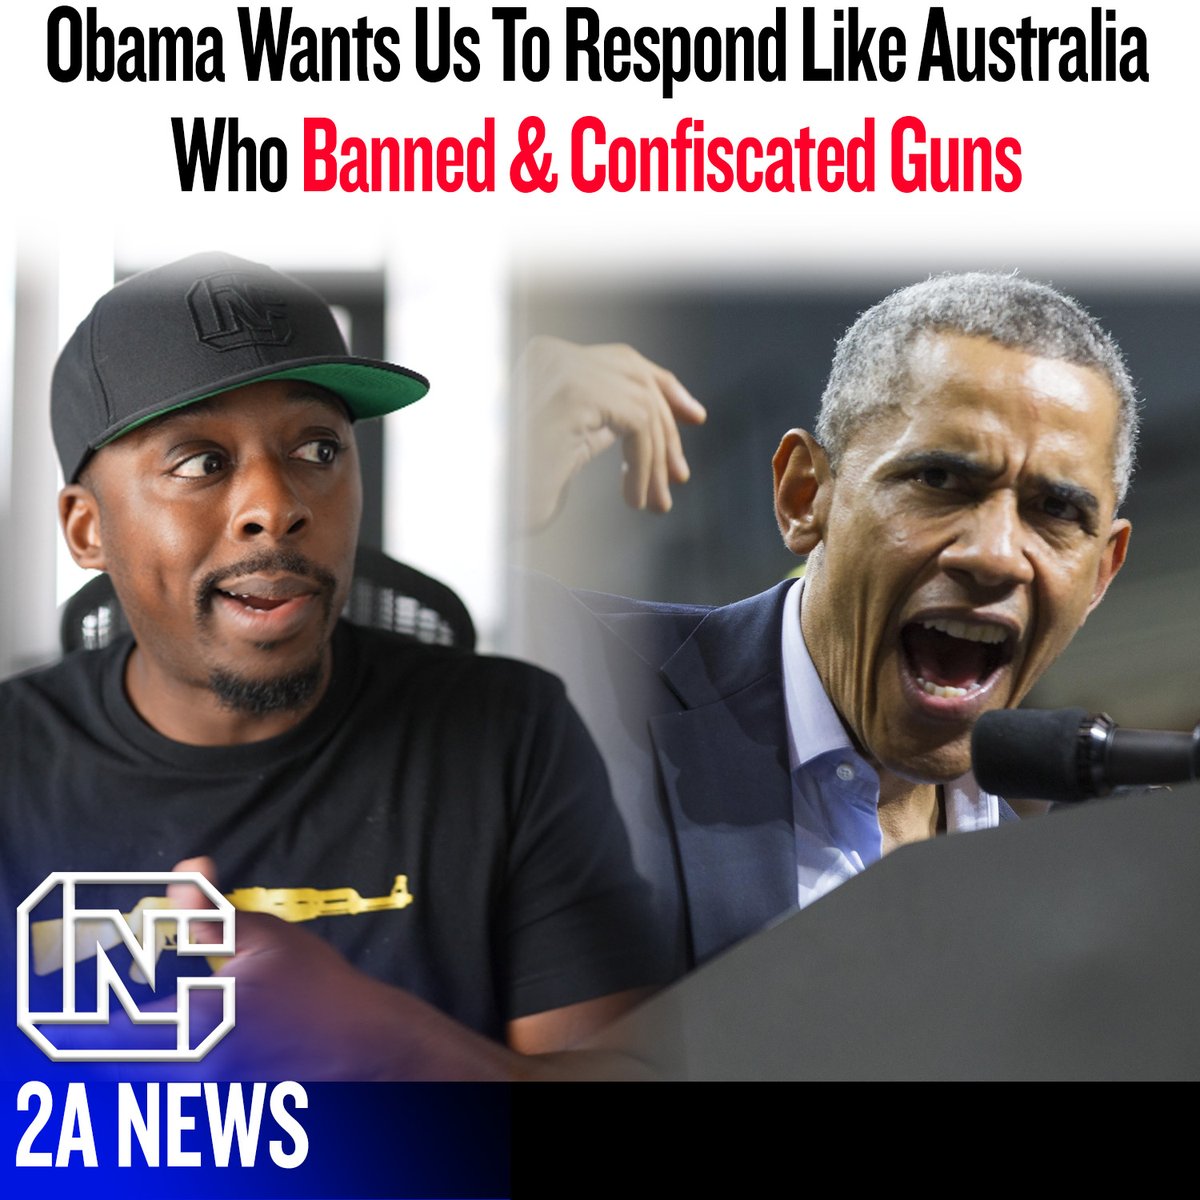 In a recent interview with CBS mornings, former President Obama suggested that the United States should respond to mass shootings the way Australia did.

But let's examine what happened in Australia after their mass shooting:

WATCH: youtu.be/U6Eoss6iLsY

#2ANews